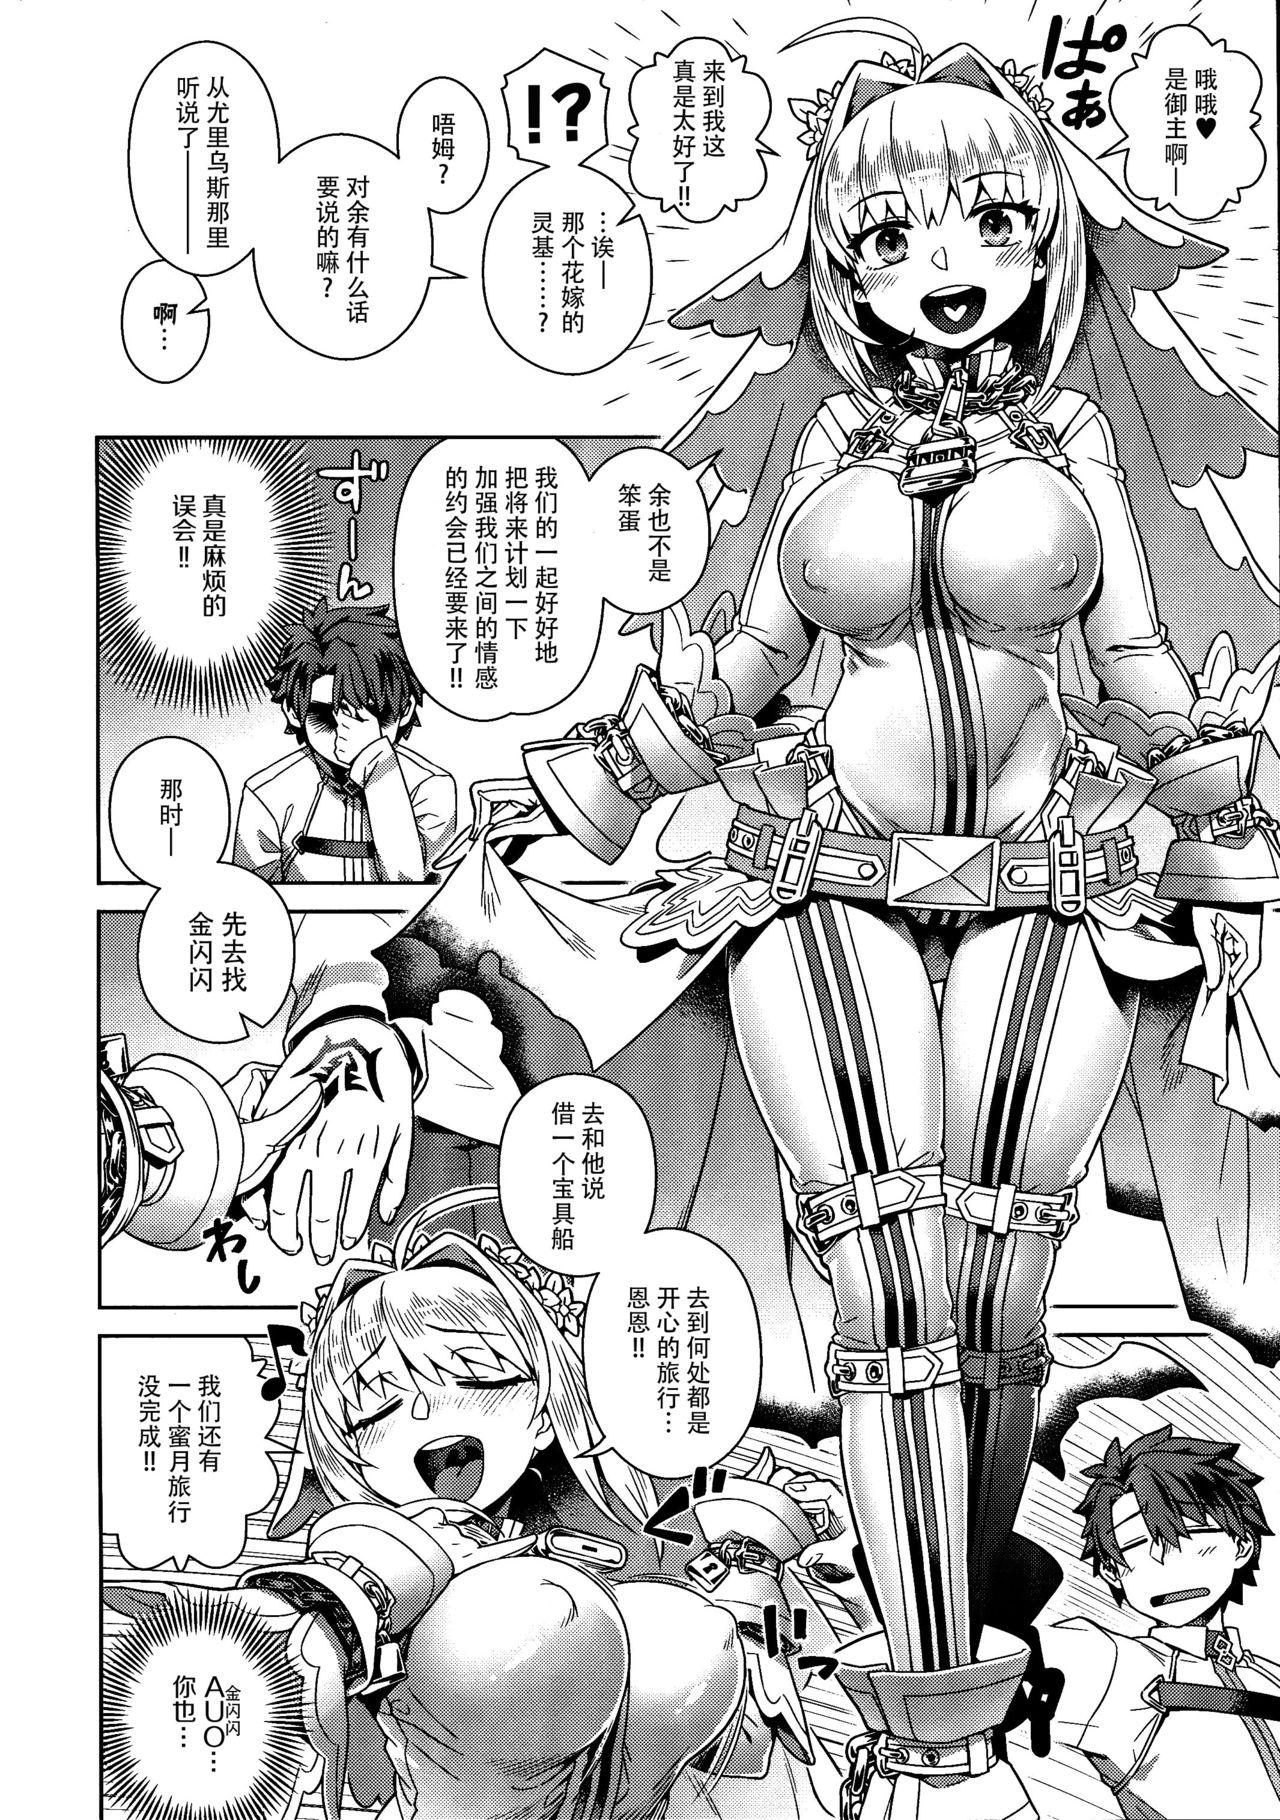 Porn Icha Love Ero Claudius - Fate grand order Ass To Mouth - Page 4